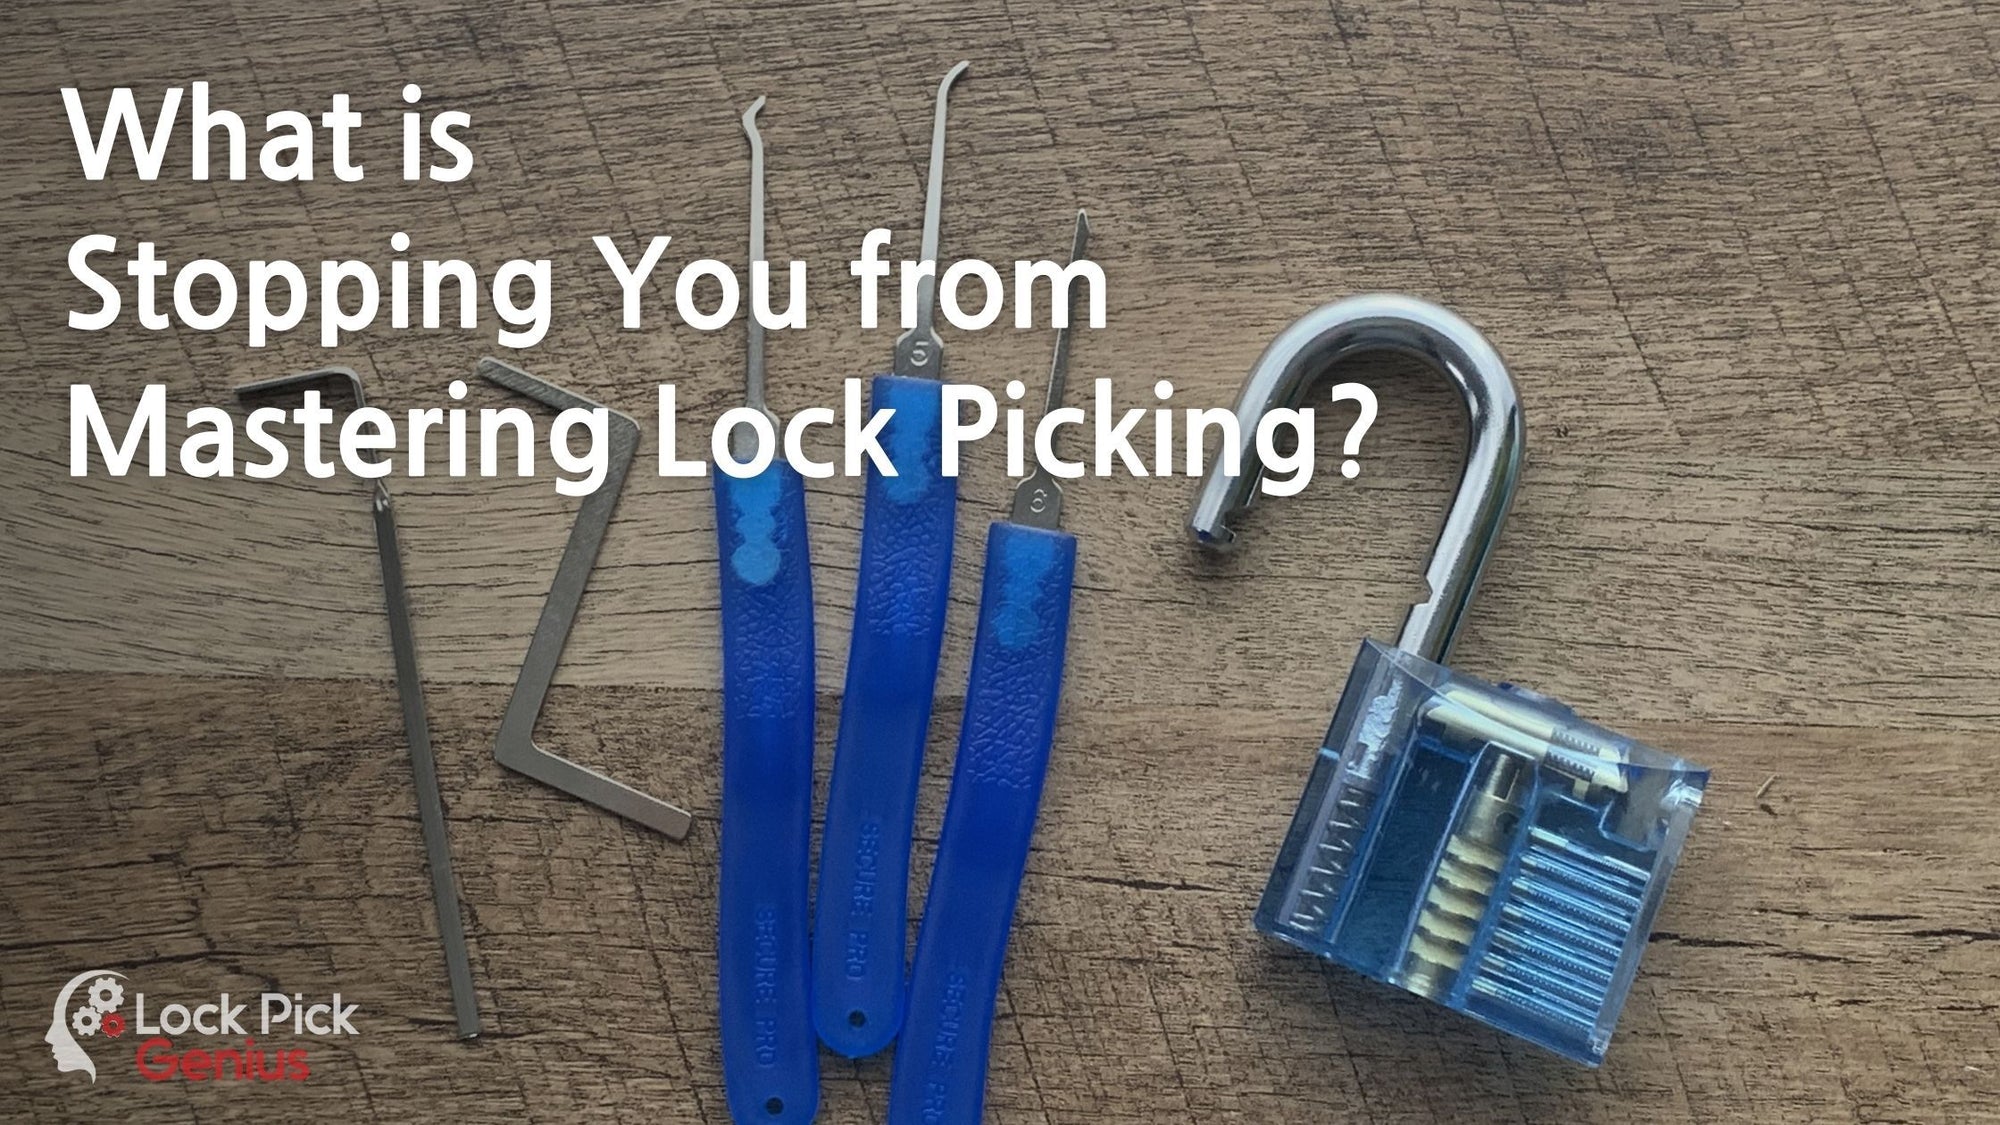 What Is Stopping You from Mastering Lock Picking?